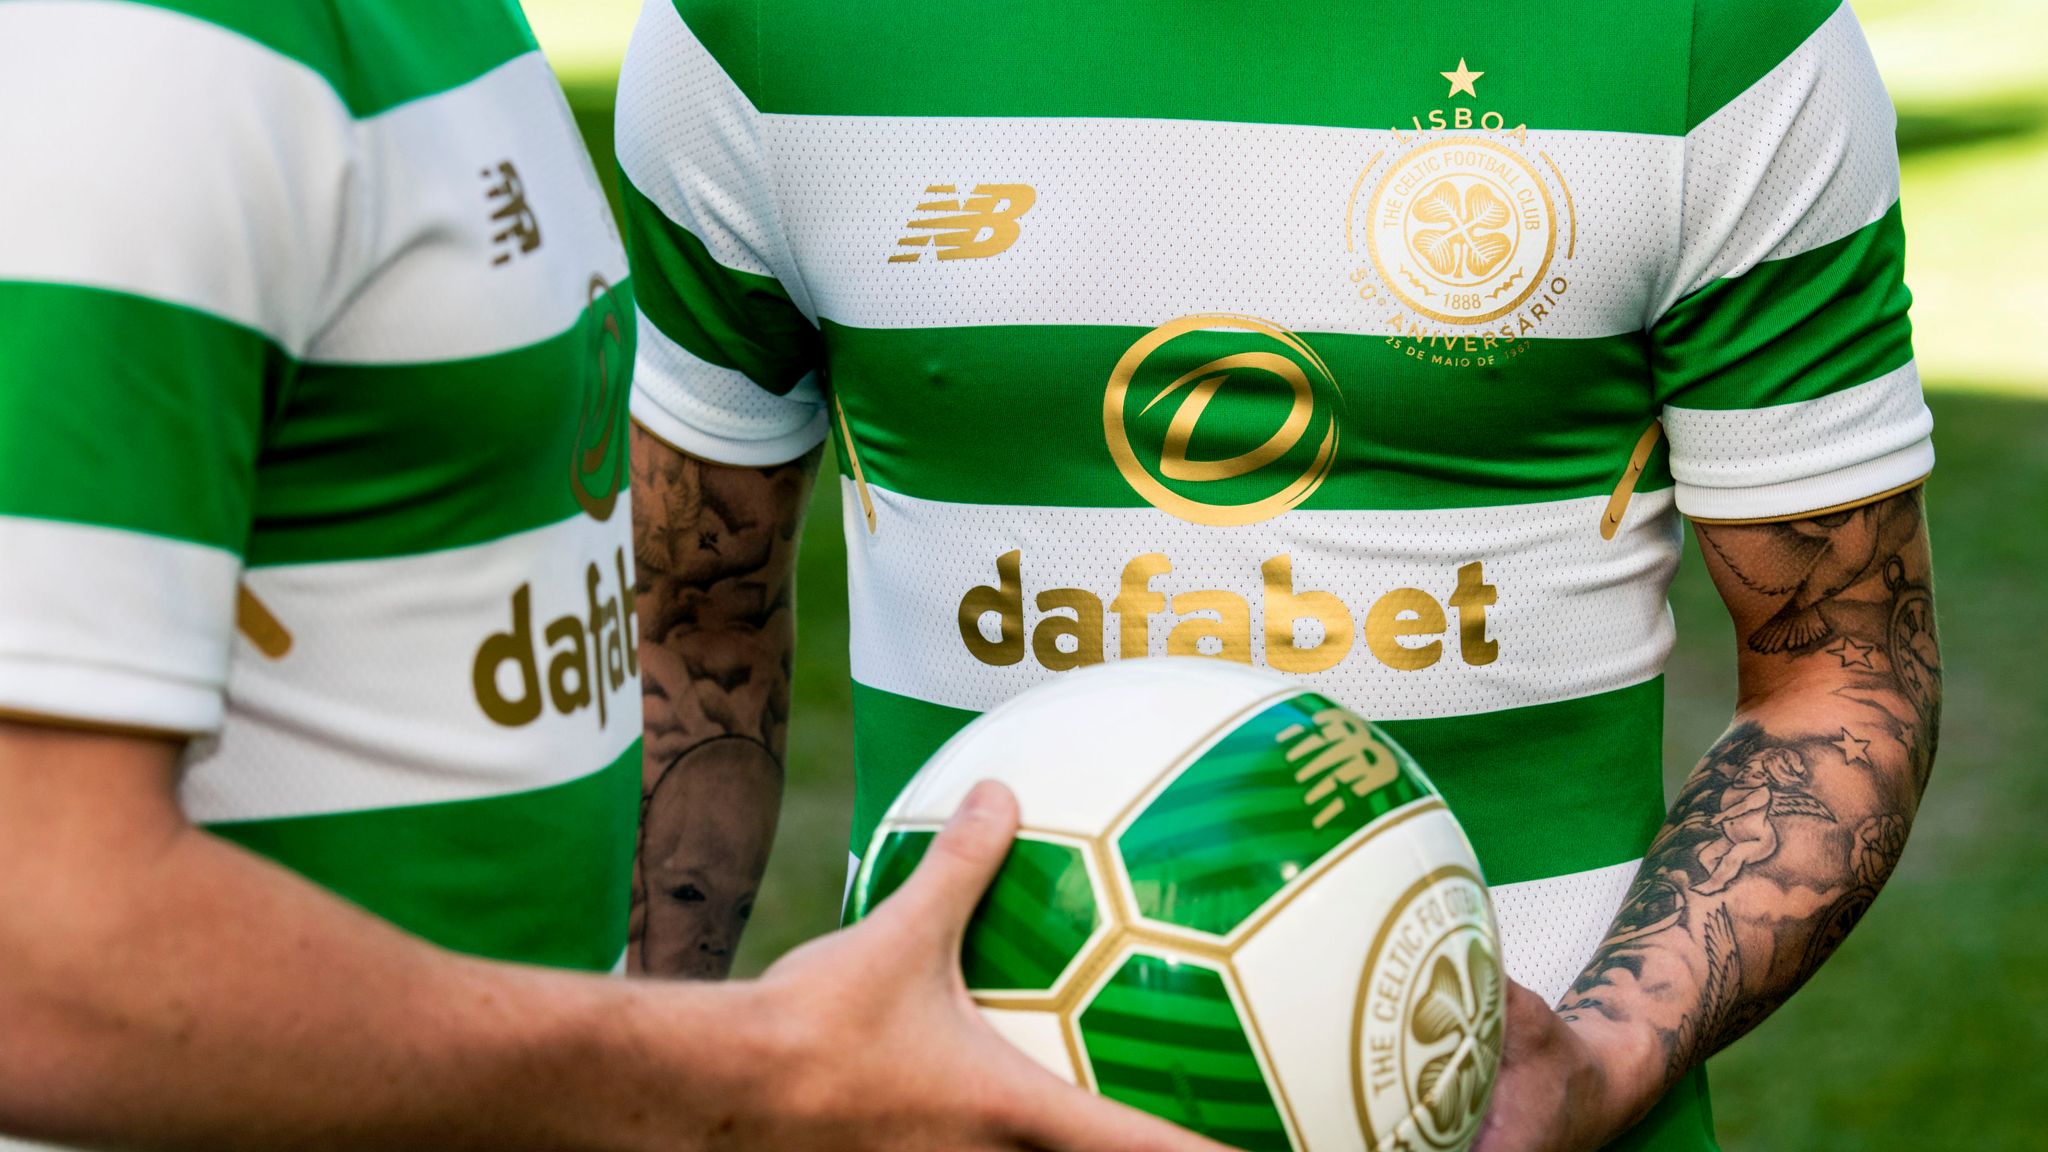 Celtic launch 2017/18 kit paying tribute to Lisbon Lions 50 years